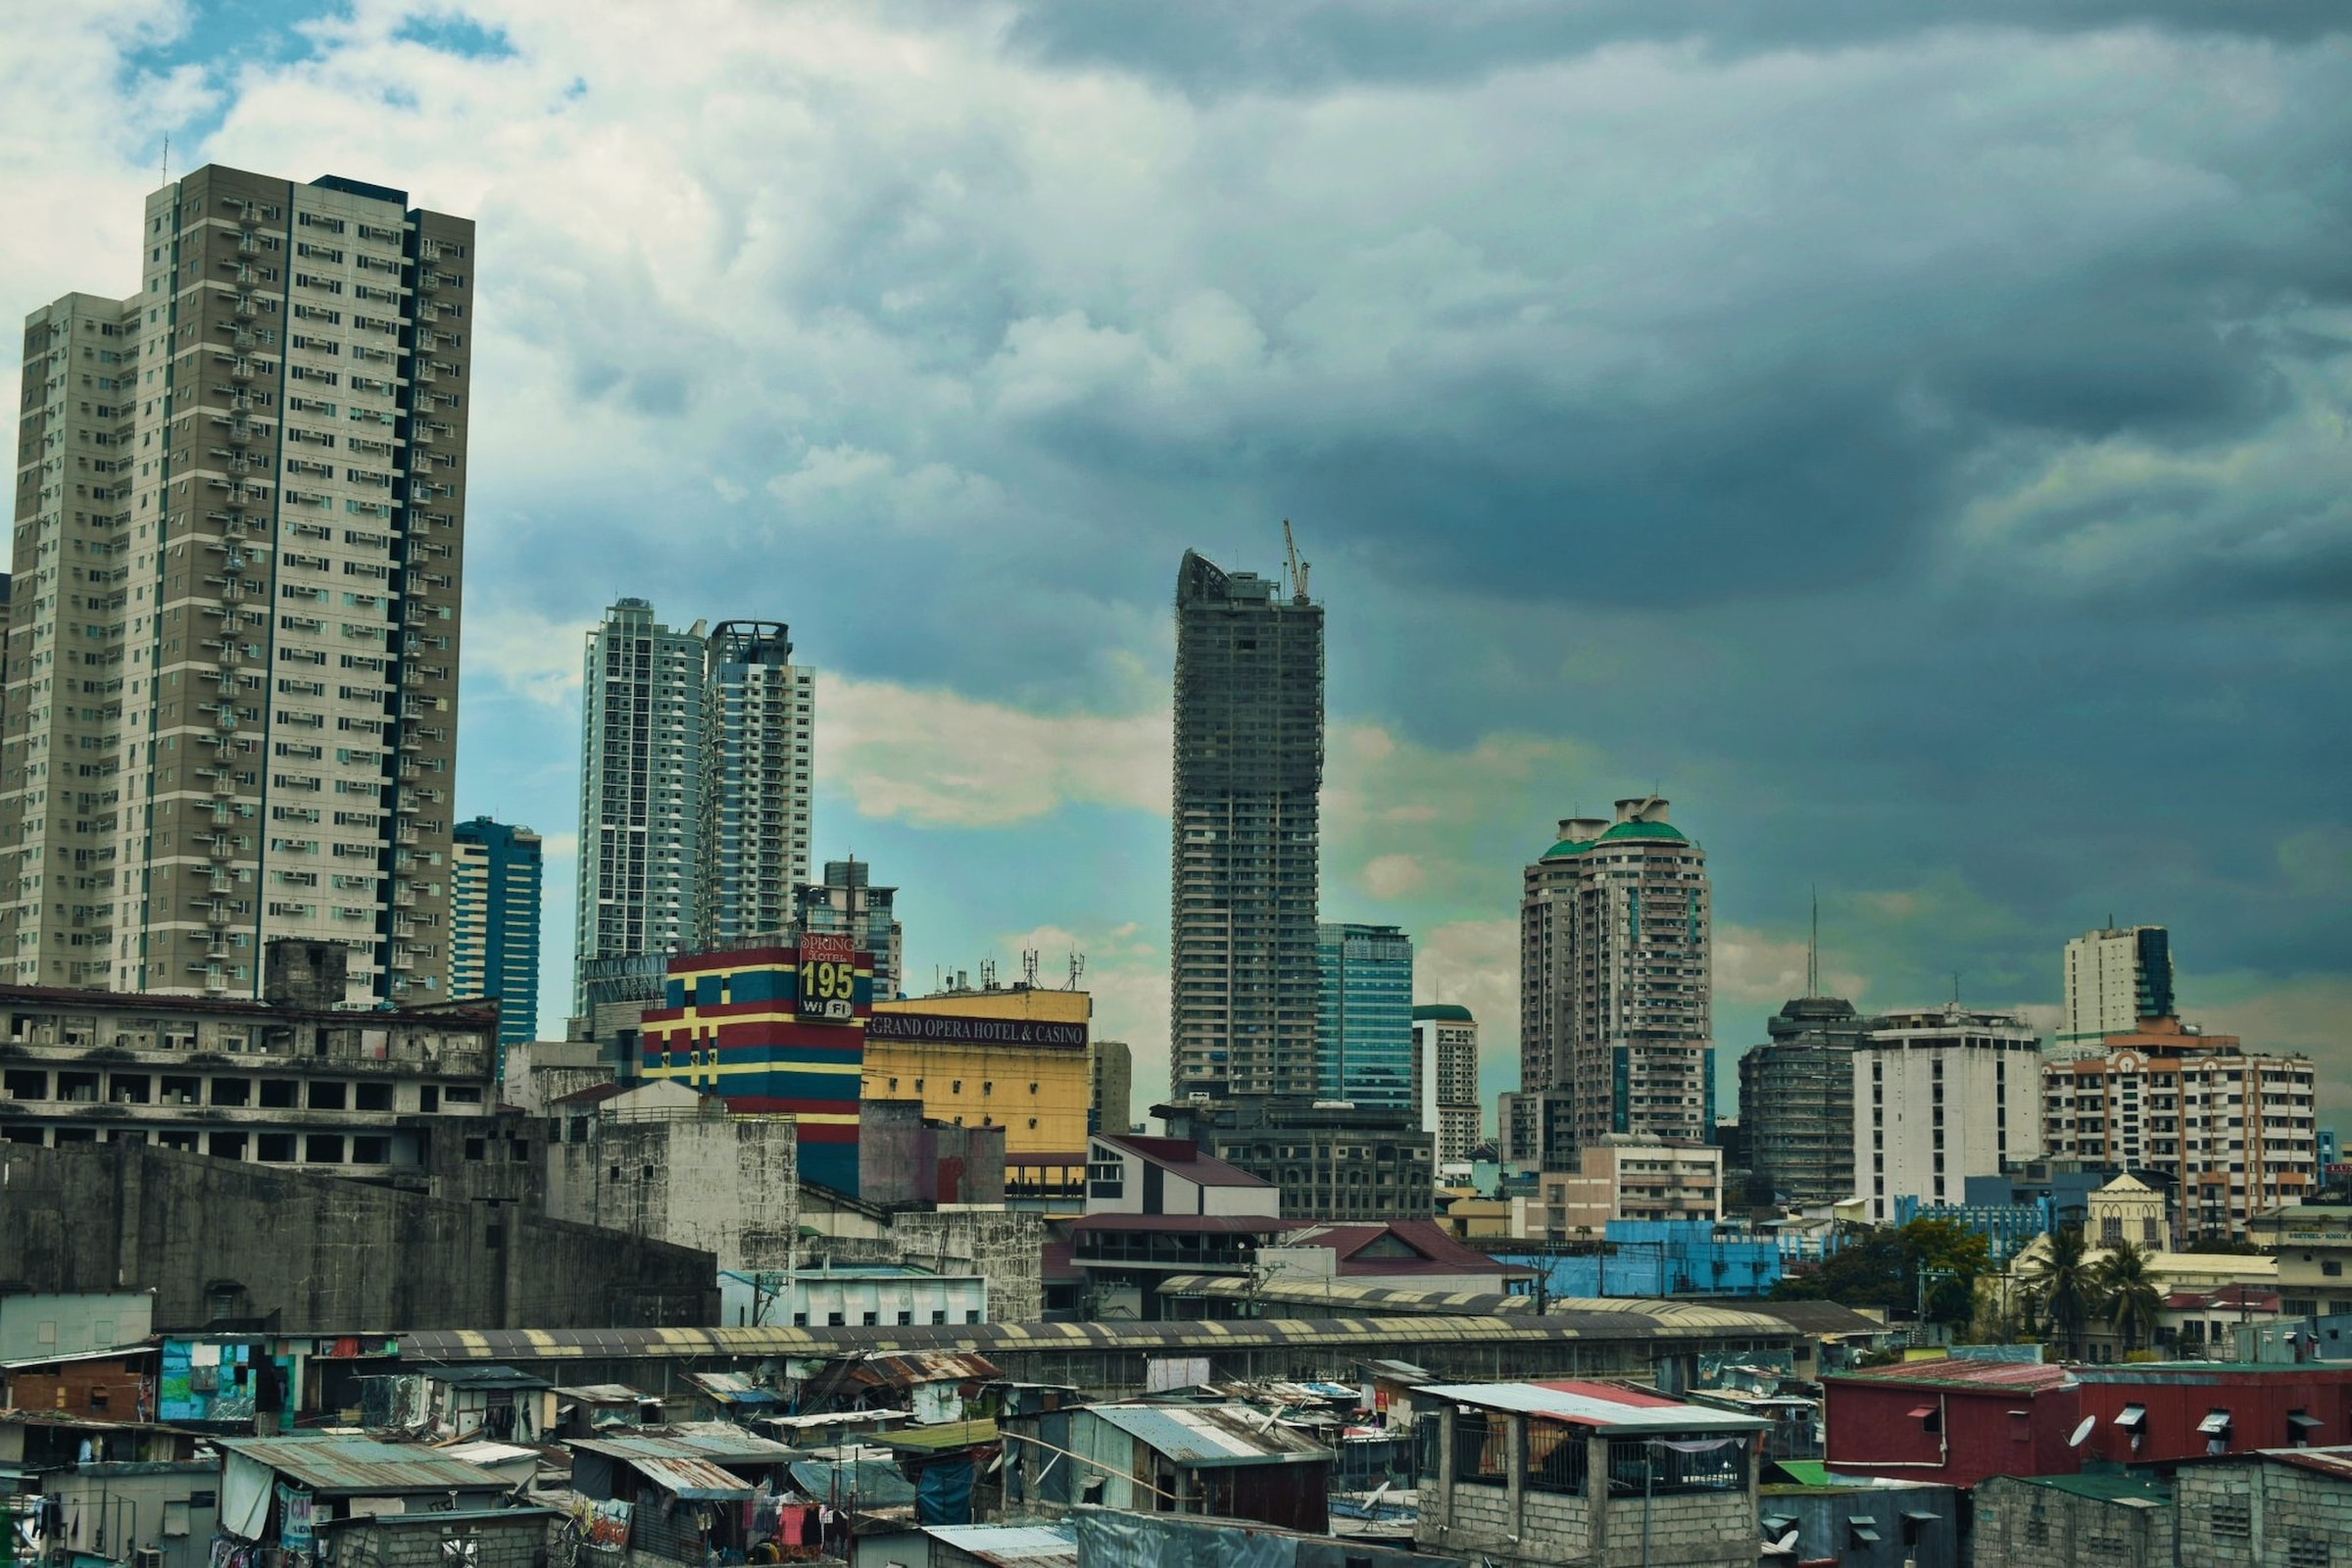 A view of a city with tall buildings in Manila